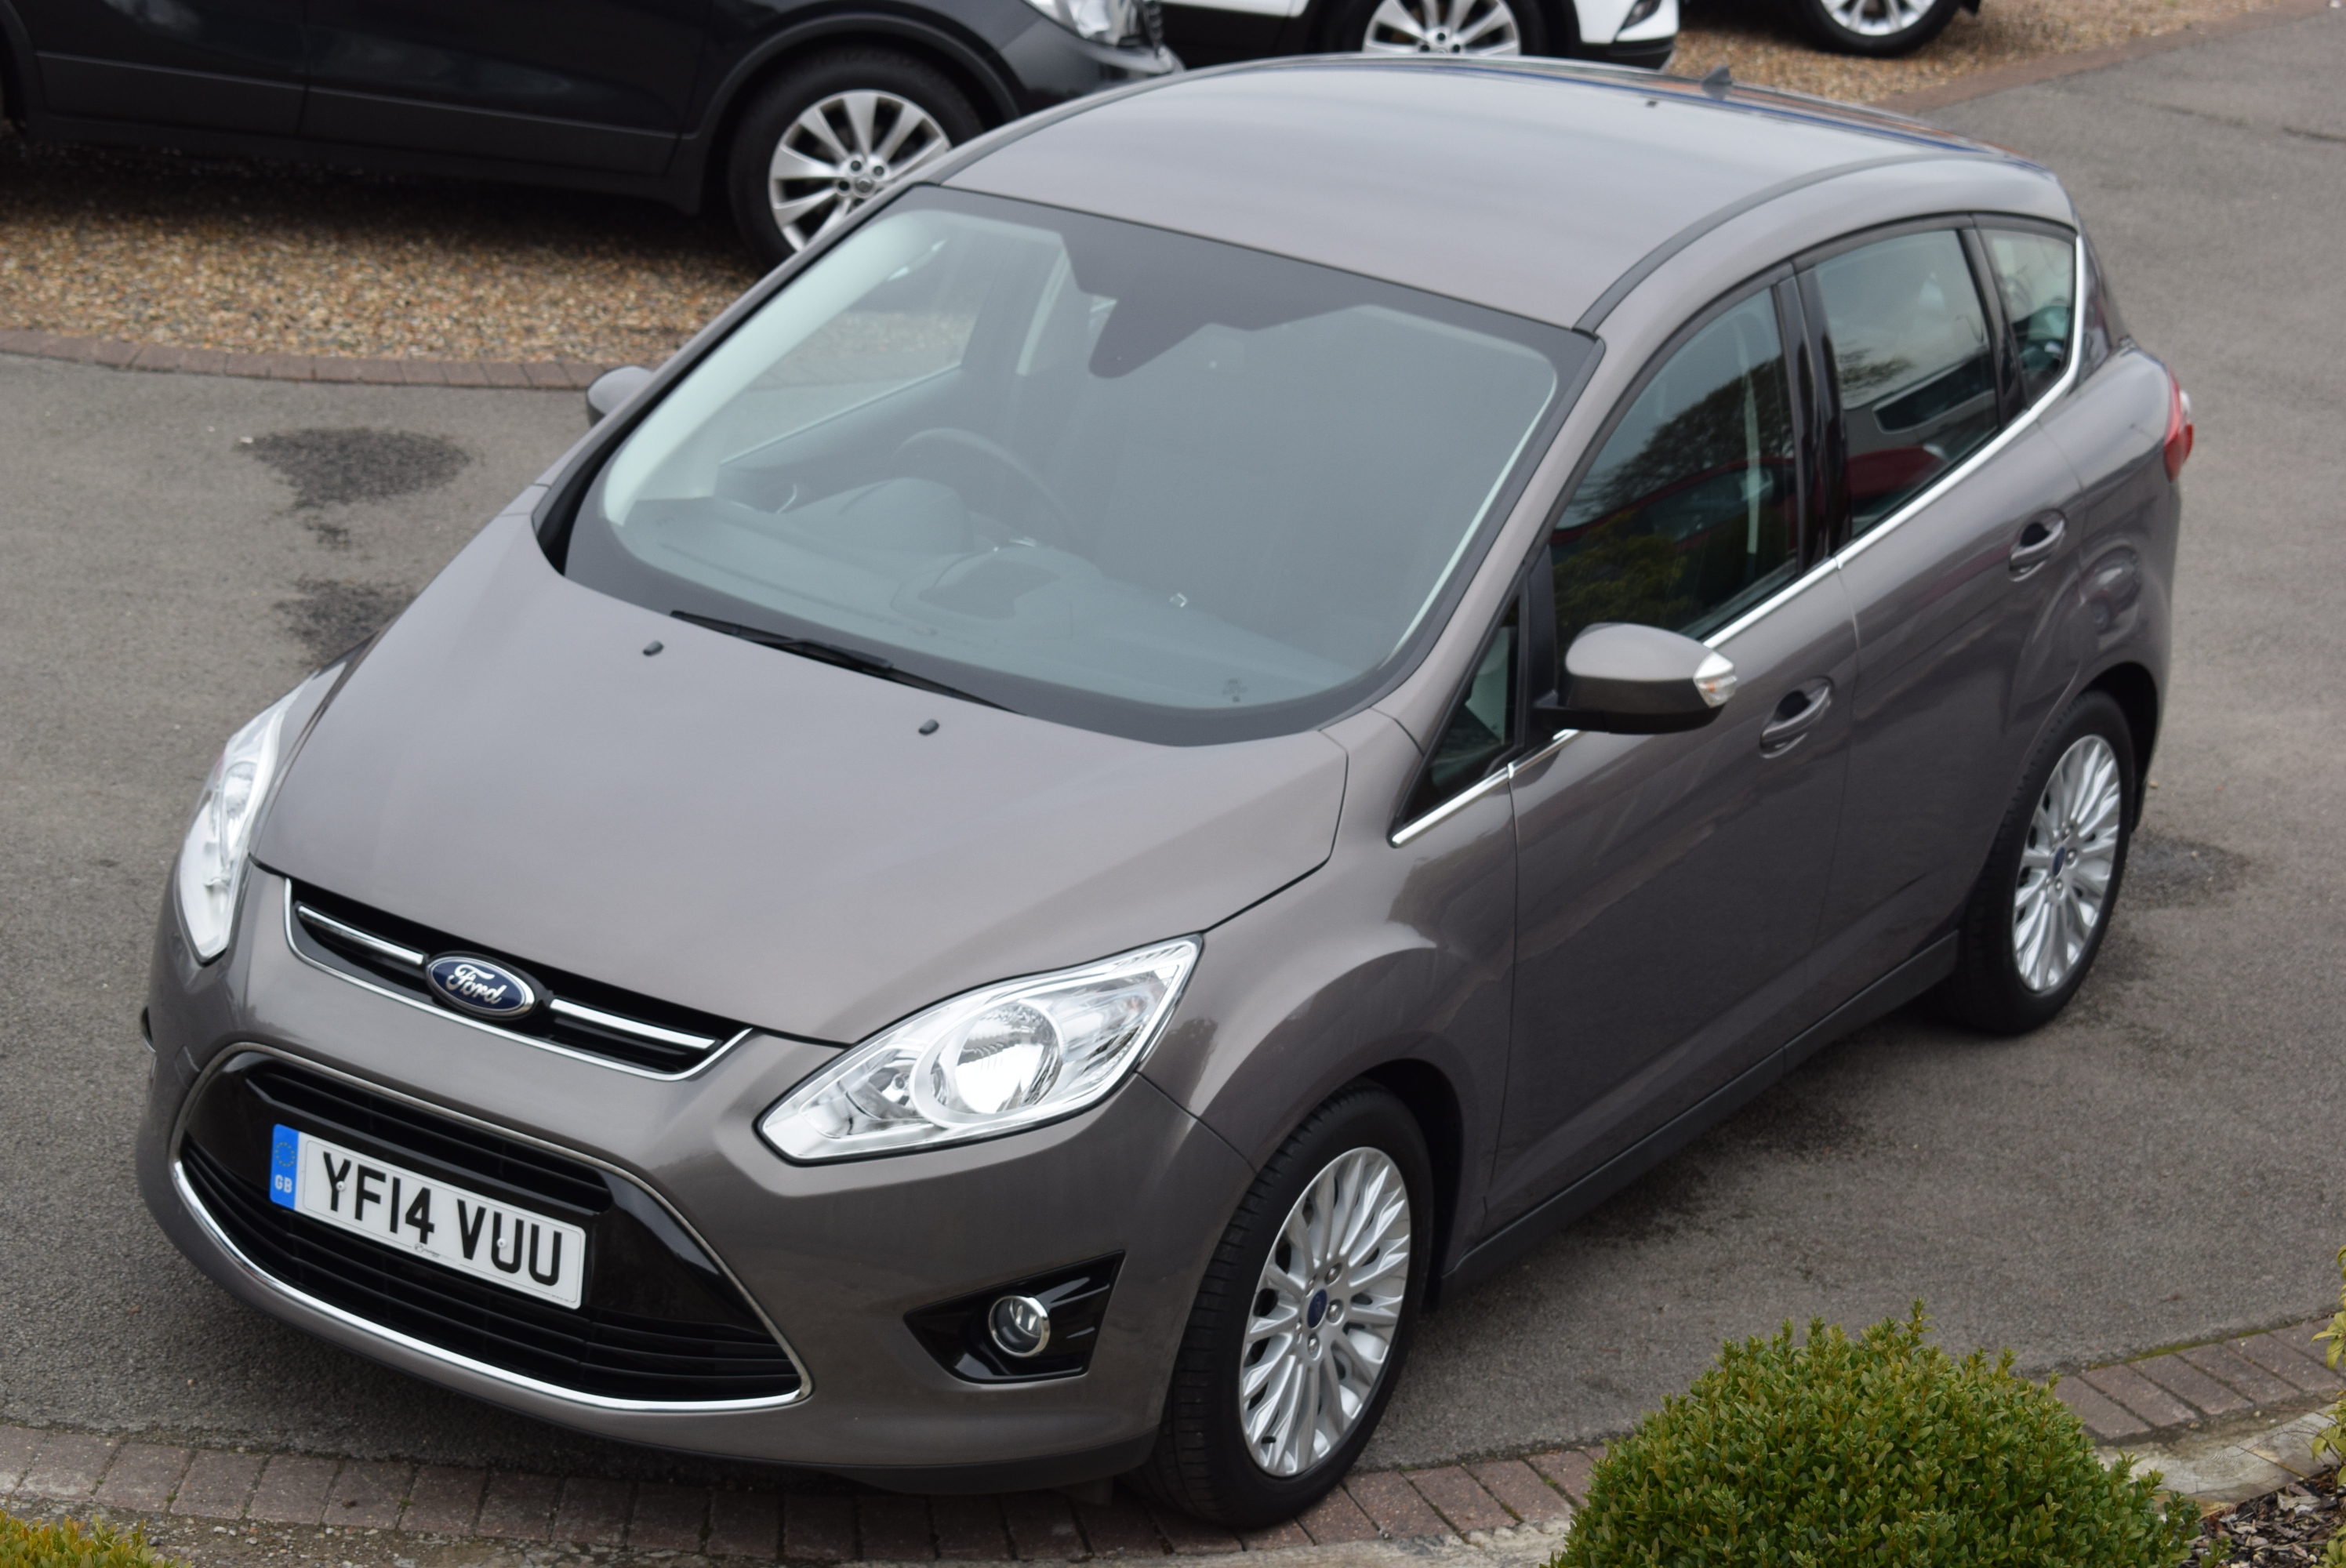 FORD CMAX 1.6 TDCi Titanium 5dr For Sale Richlee Motor